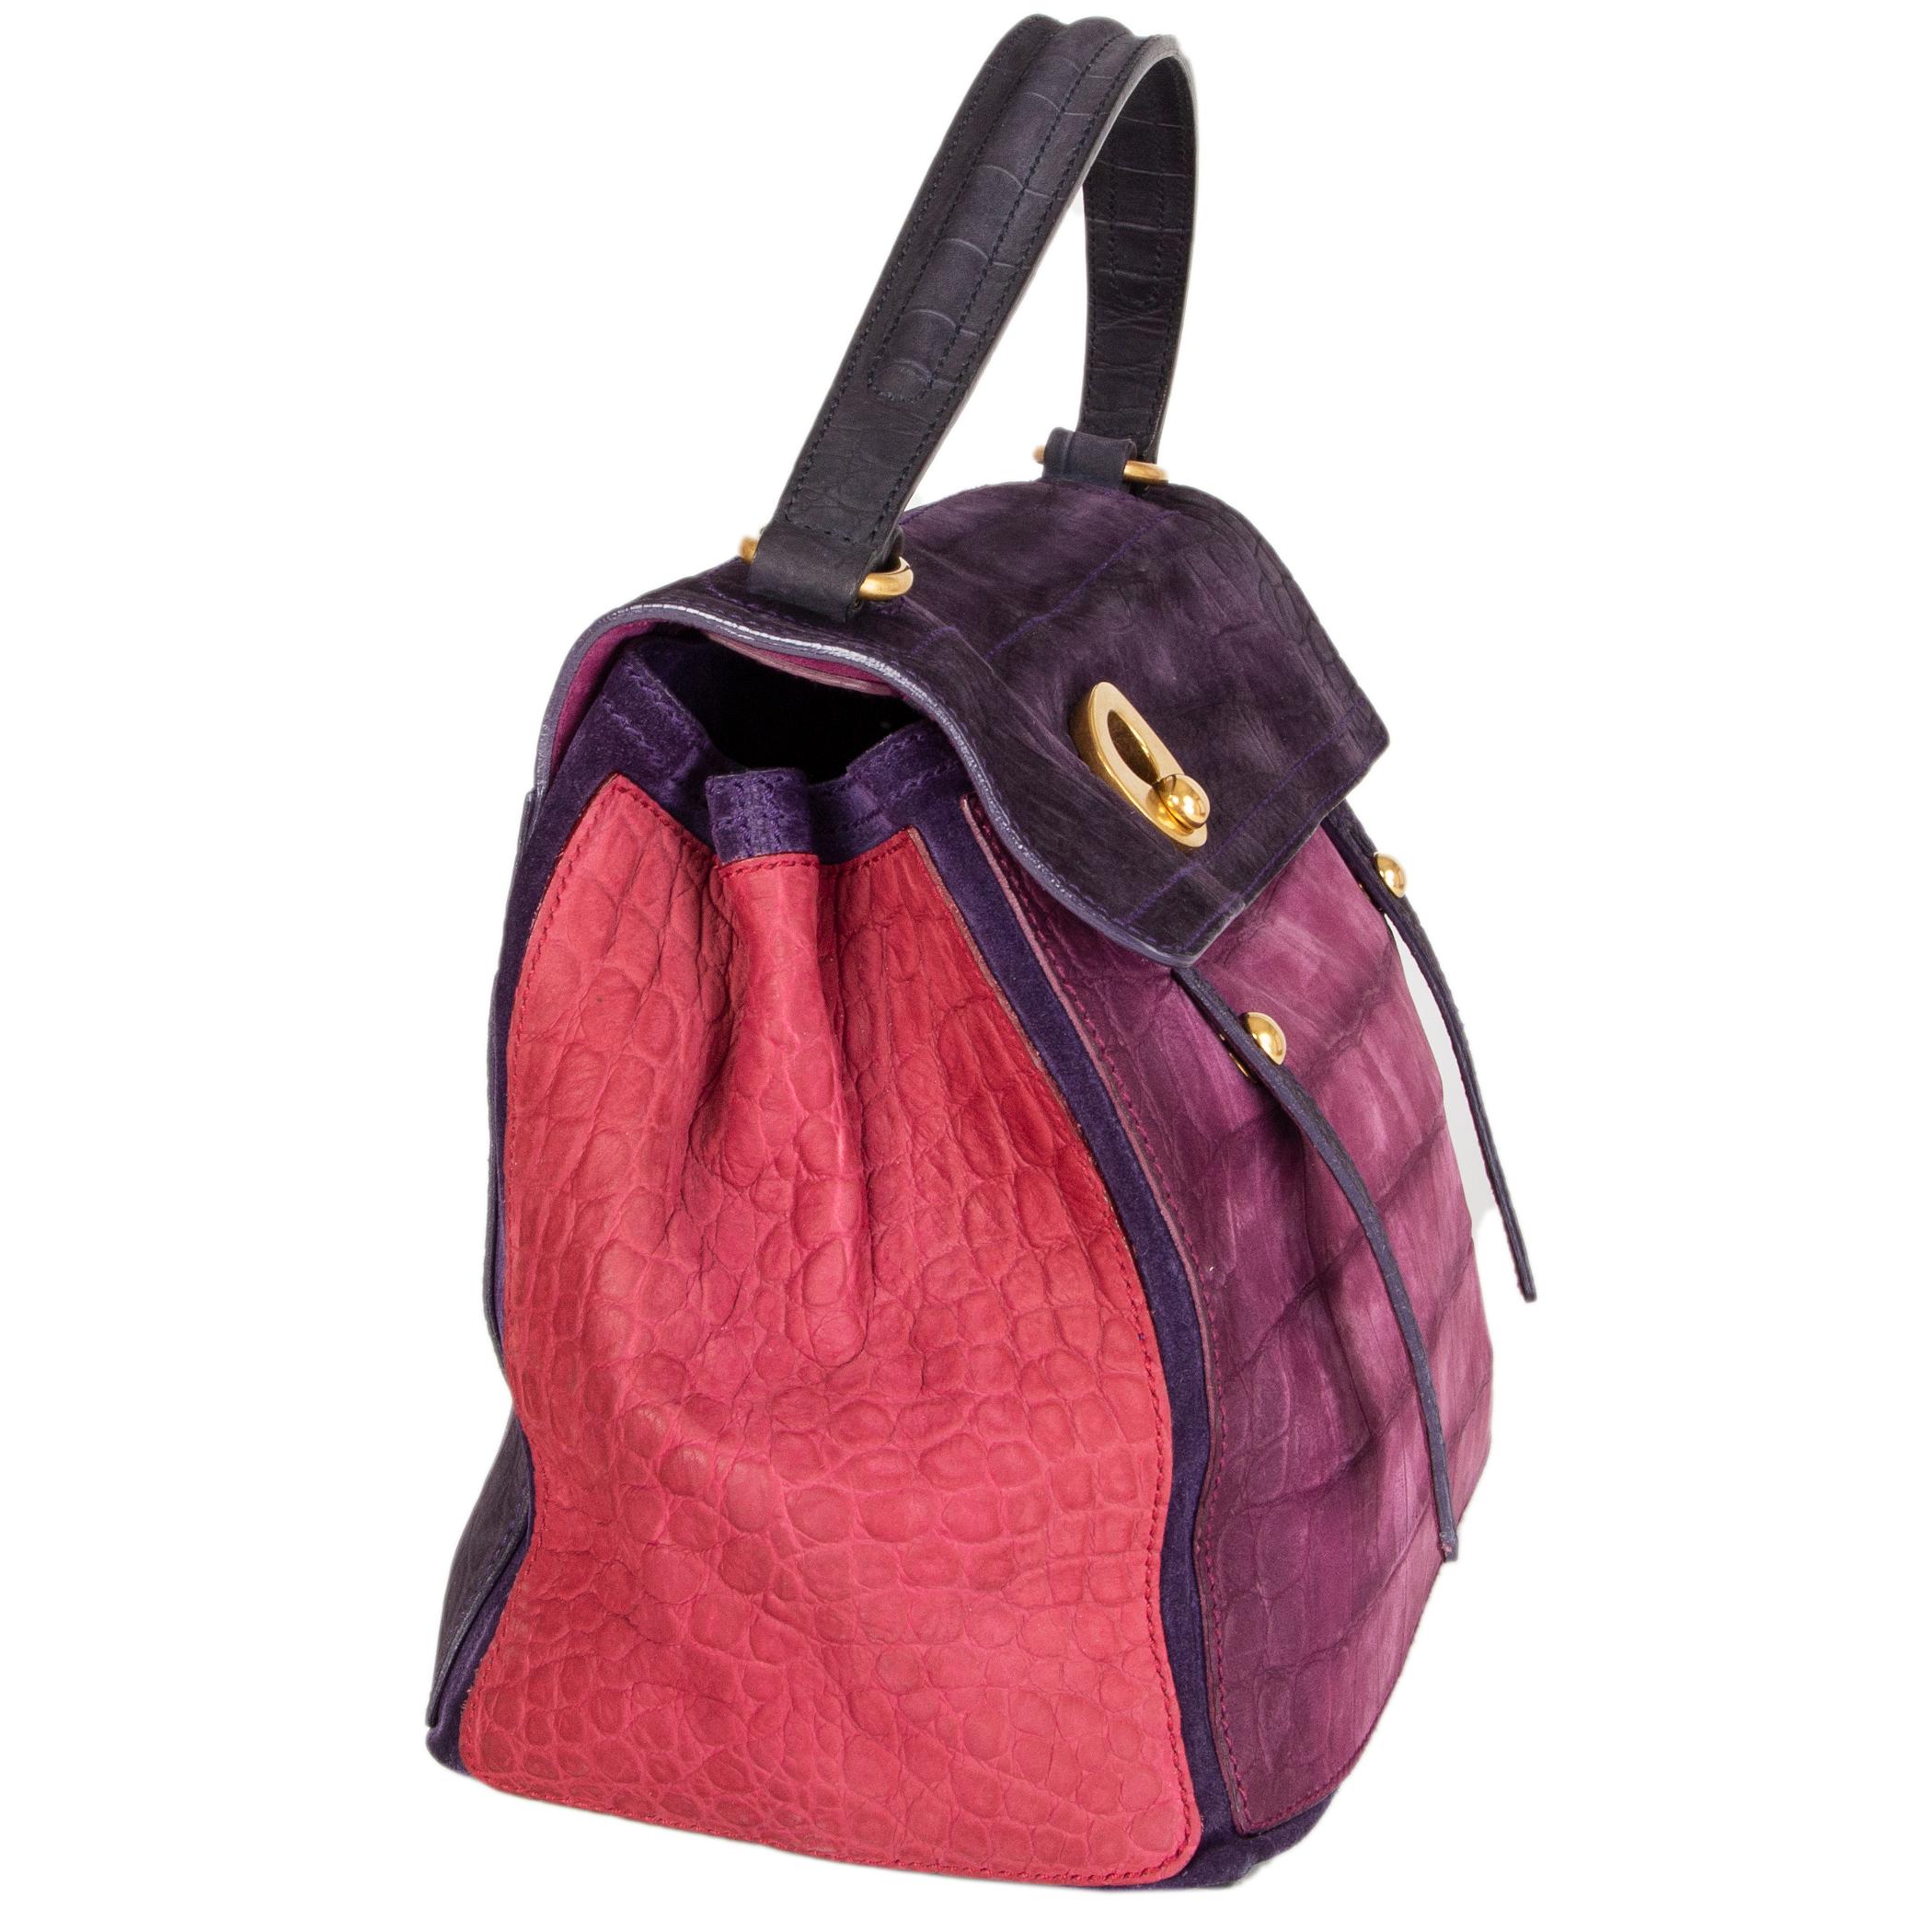 Yves Saint Laurent 'Muse 2' medium shoulder bag in purple, fuchsia, midnight blue and burgundy croco embossed nubuck leather.  Full-size buttoned pocket on the back. Lined in purple suede with a full-size zipper pocket in the middle. Has been